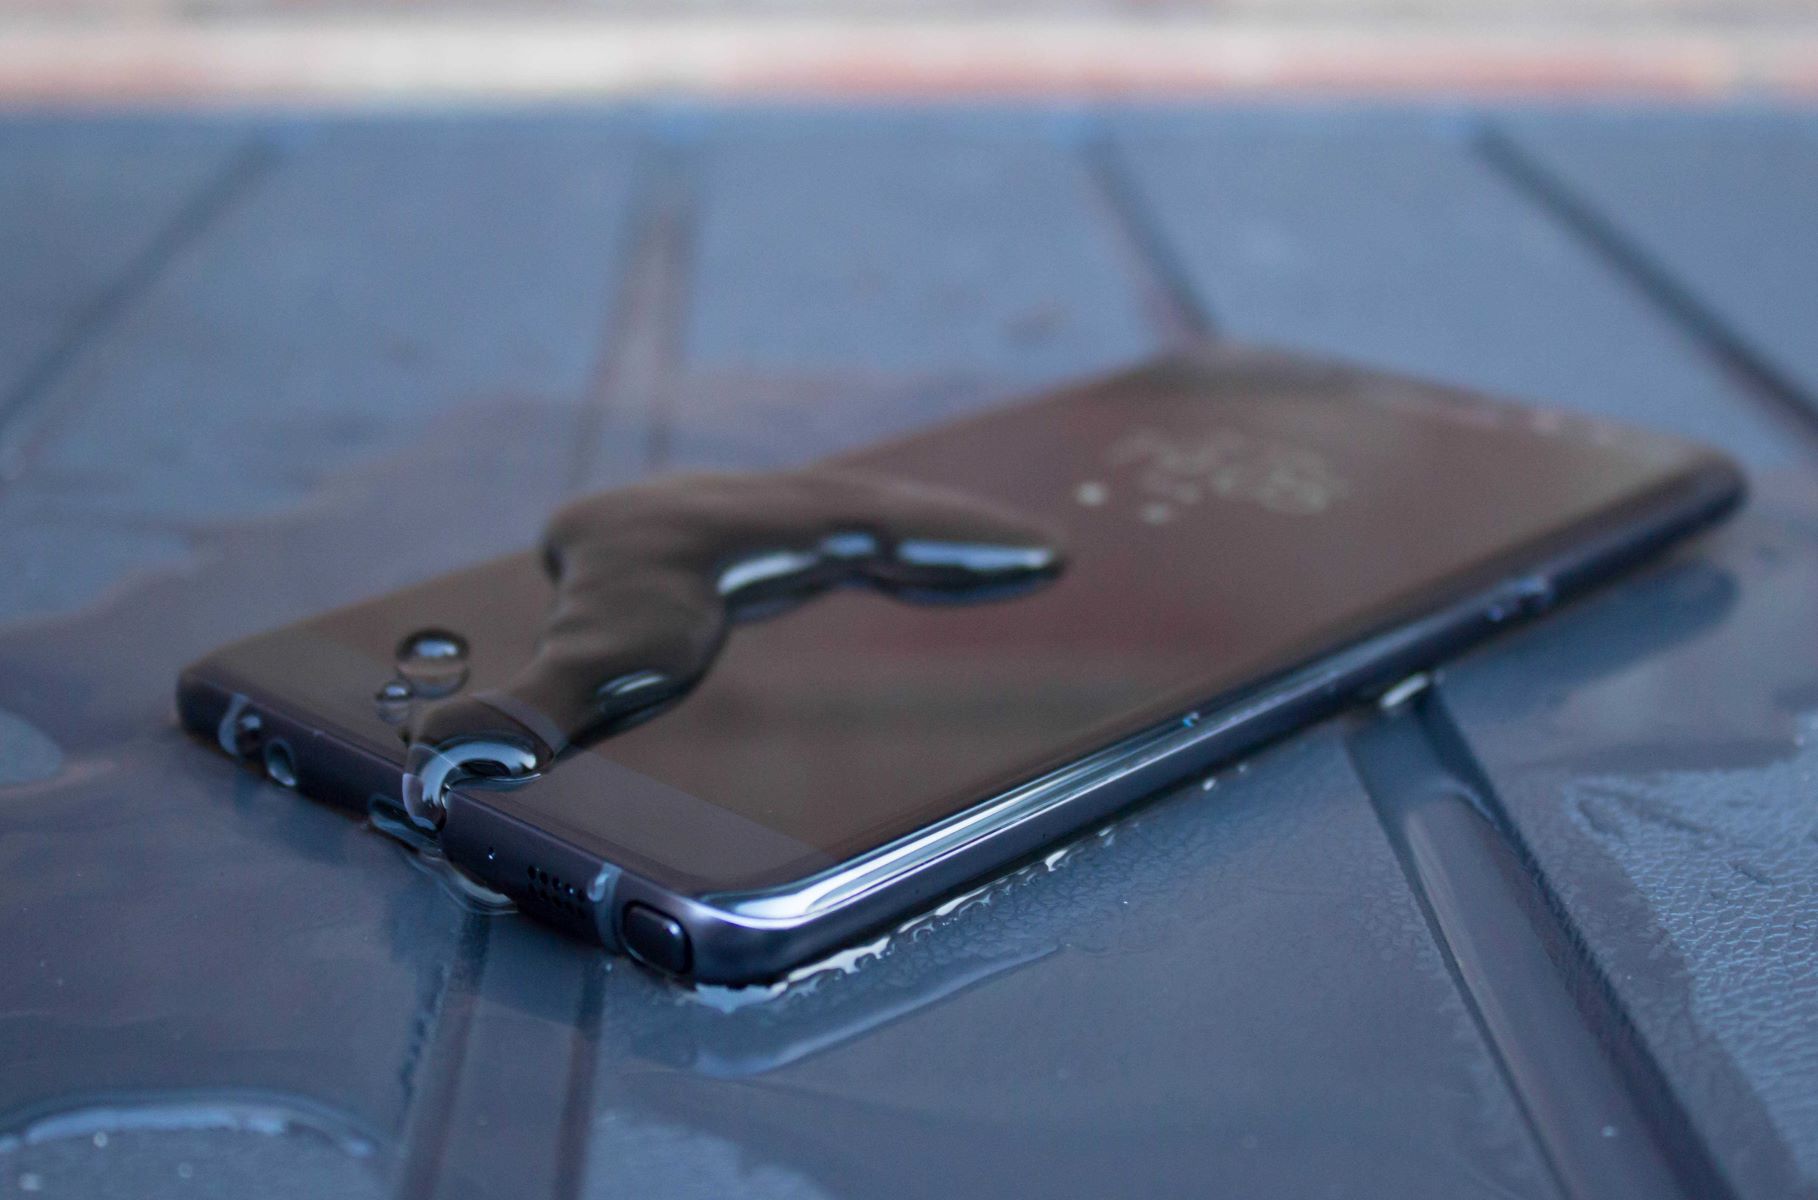 Delving Into Waterproofing: The IPhone X Capability